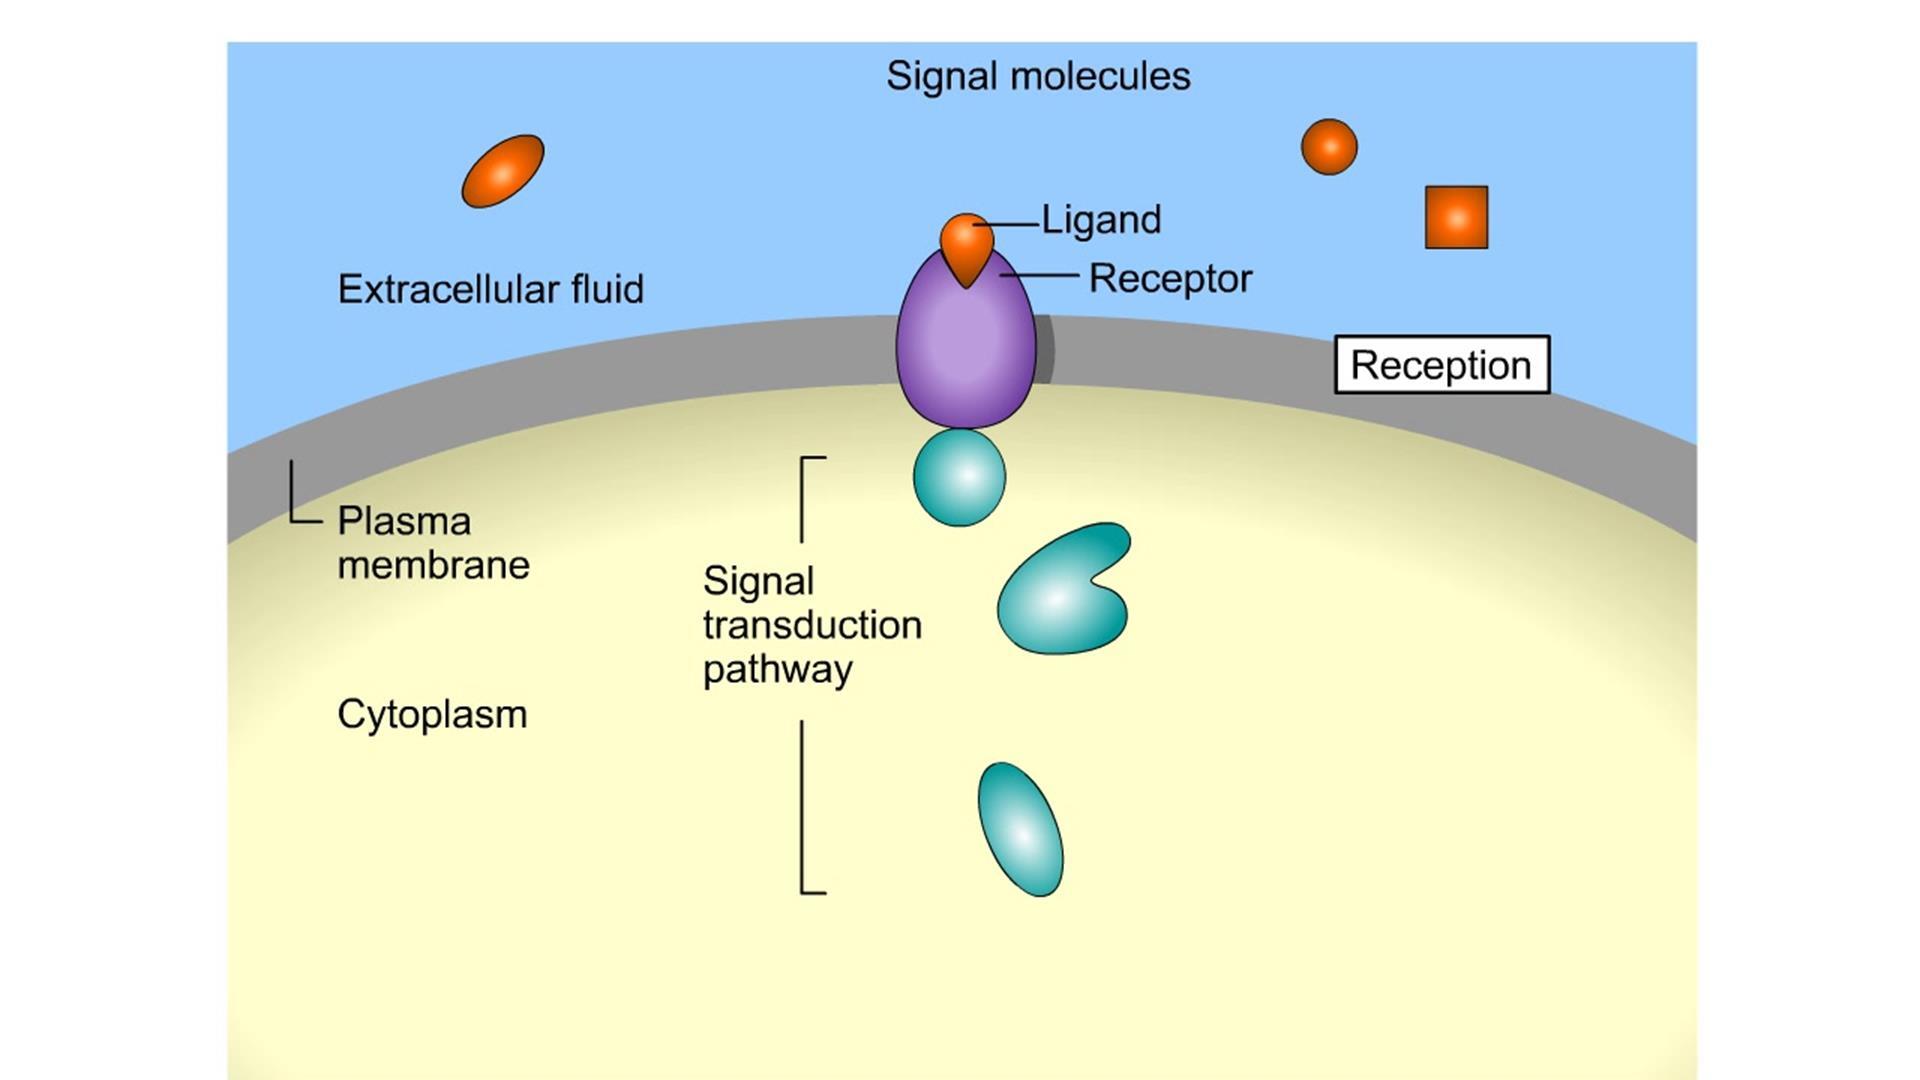 8-surprising-facts-about-cell-signaling-pathways